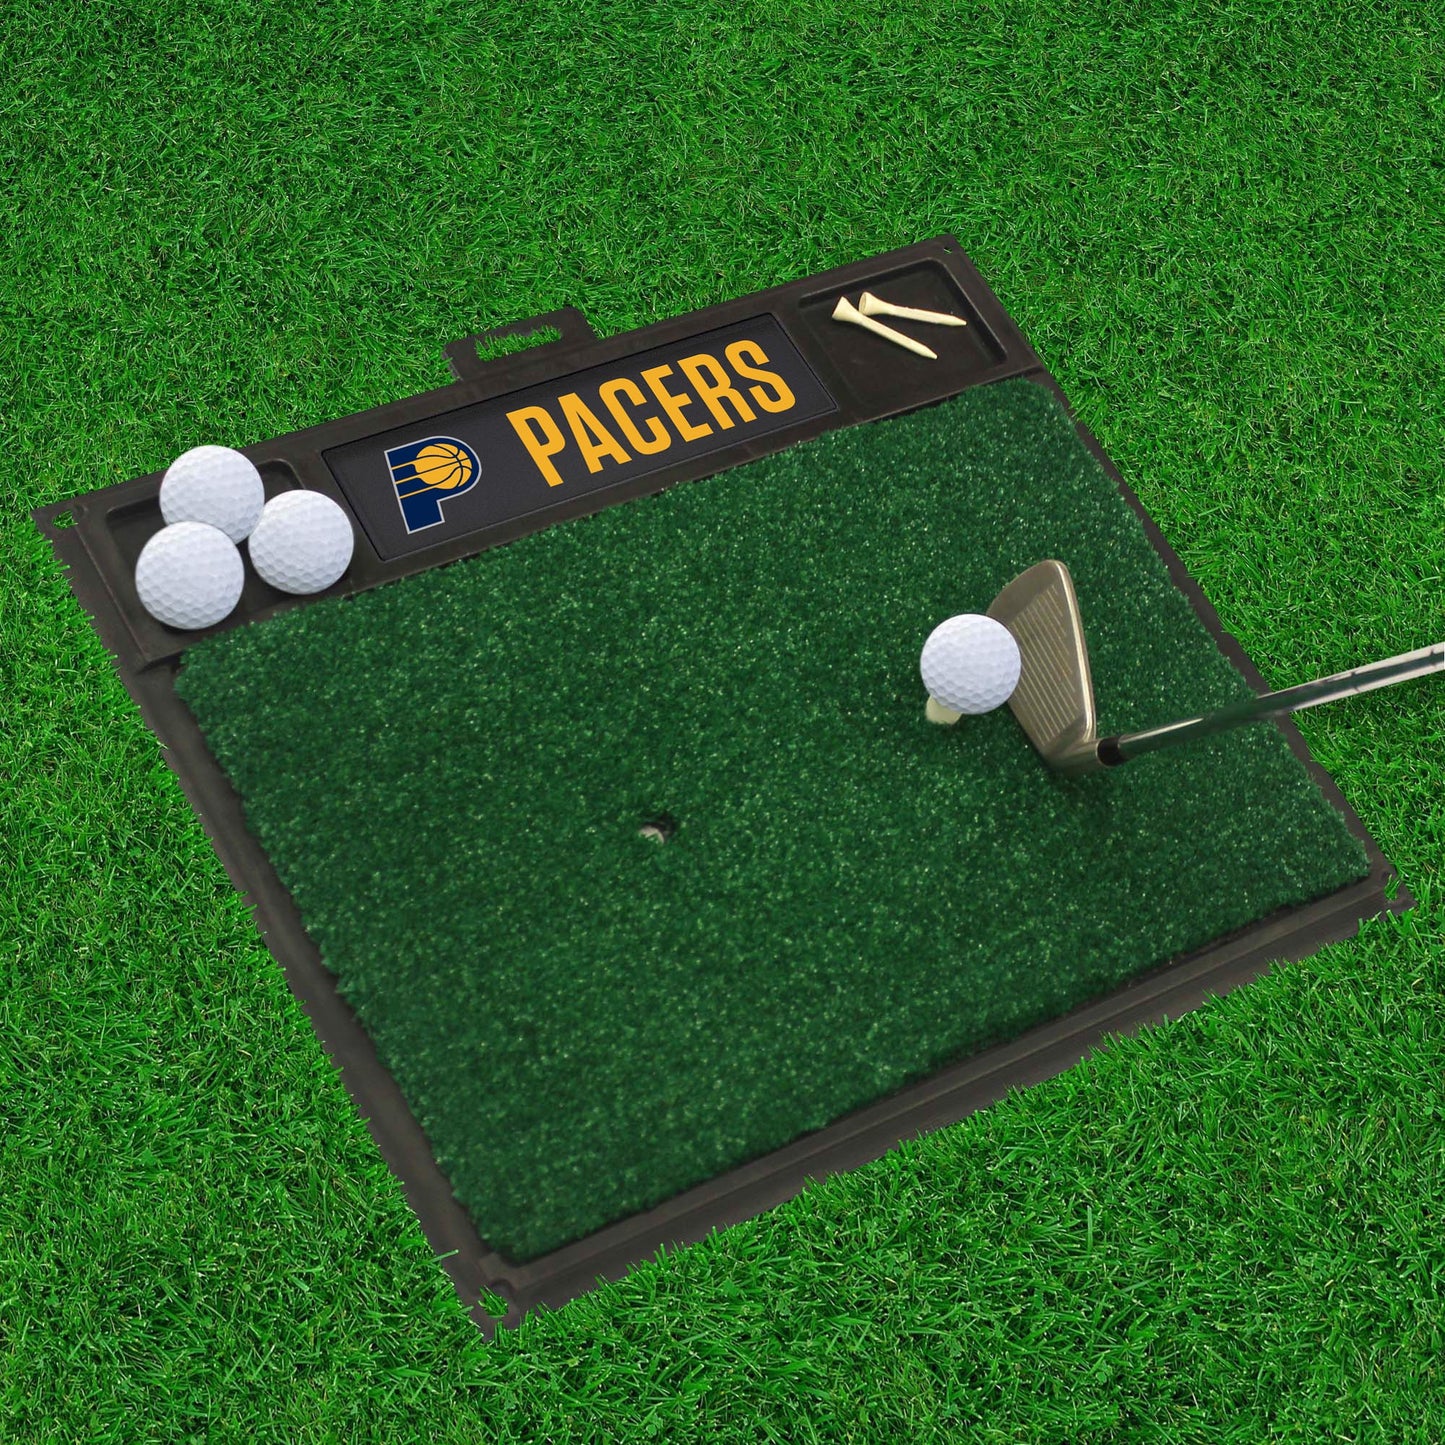 Indiana Pacers Golf Hitting Mat by Fanmats